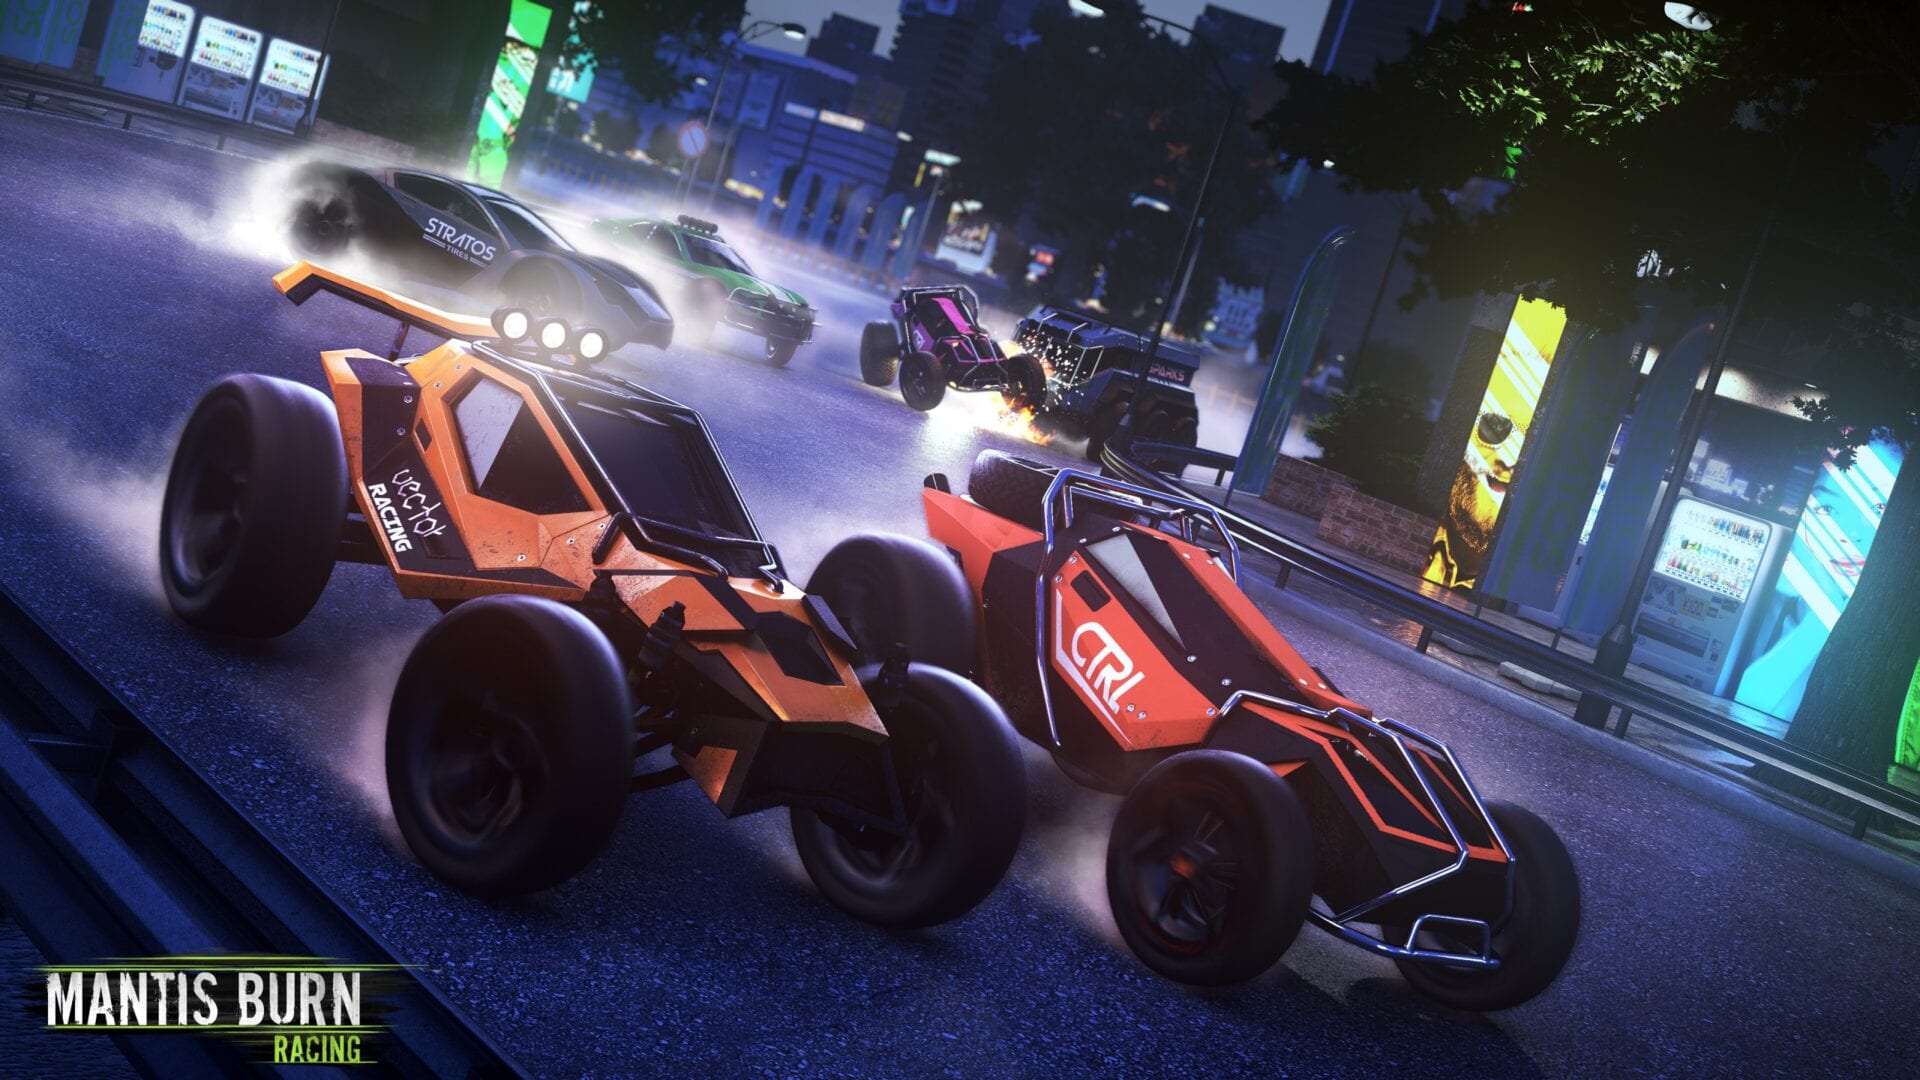 Mantis Burn Racing PS4 Update 1.02 Out Now, Brings Massive Online Improvements and General Fixes